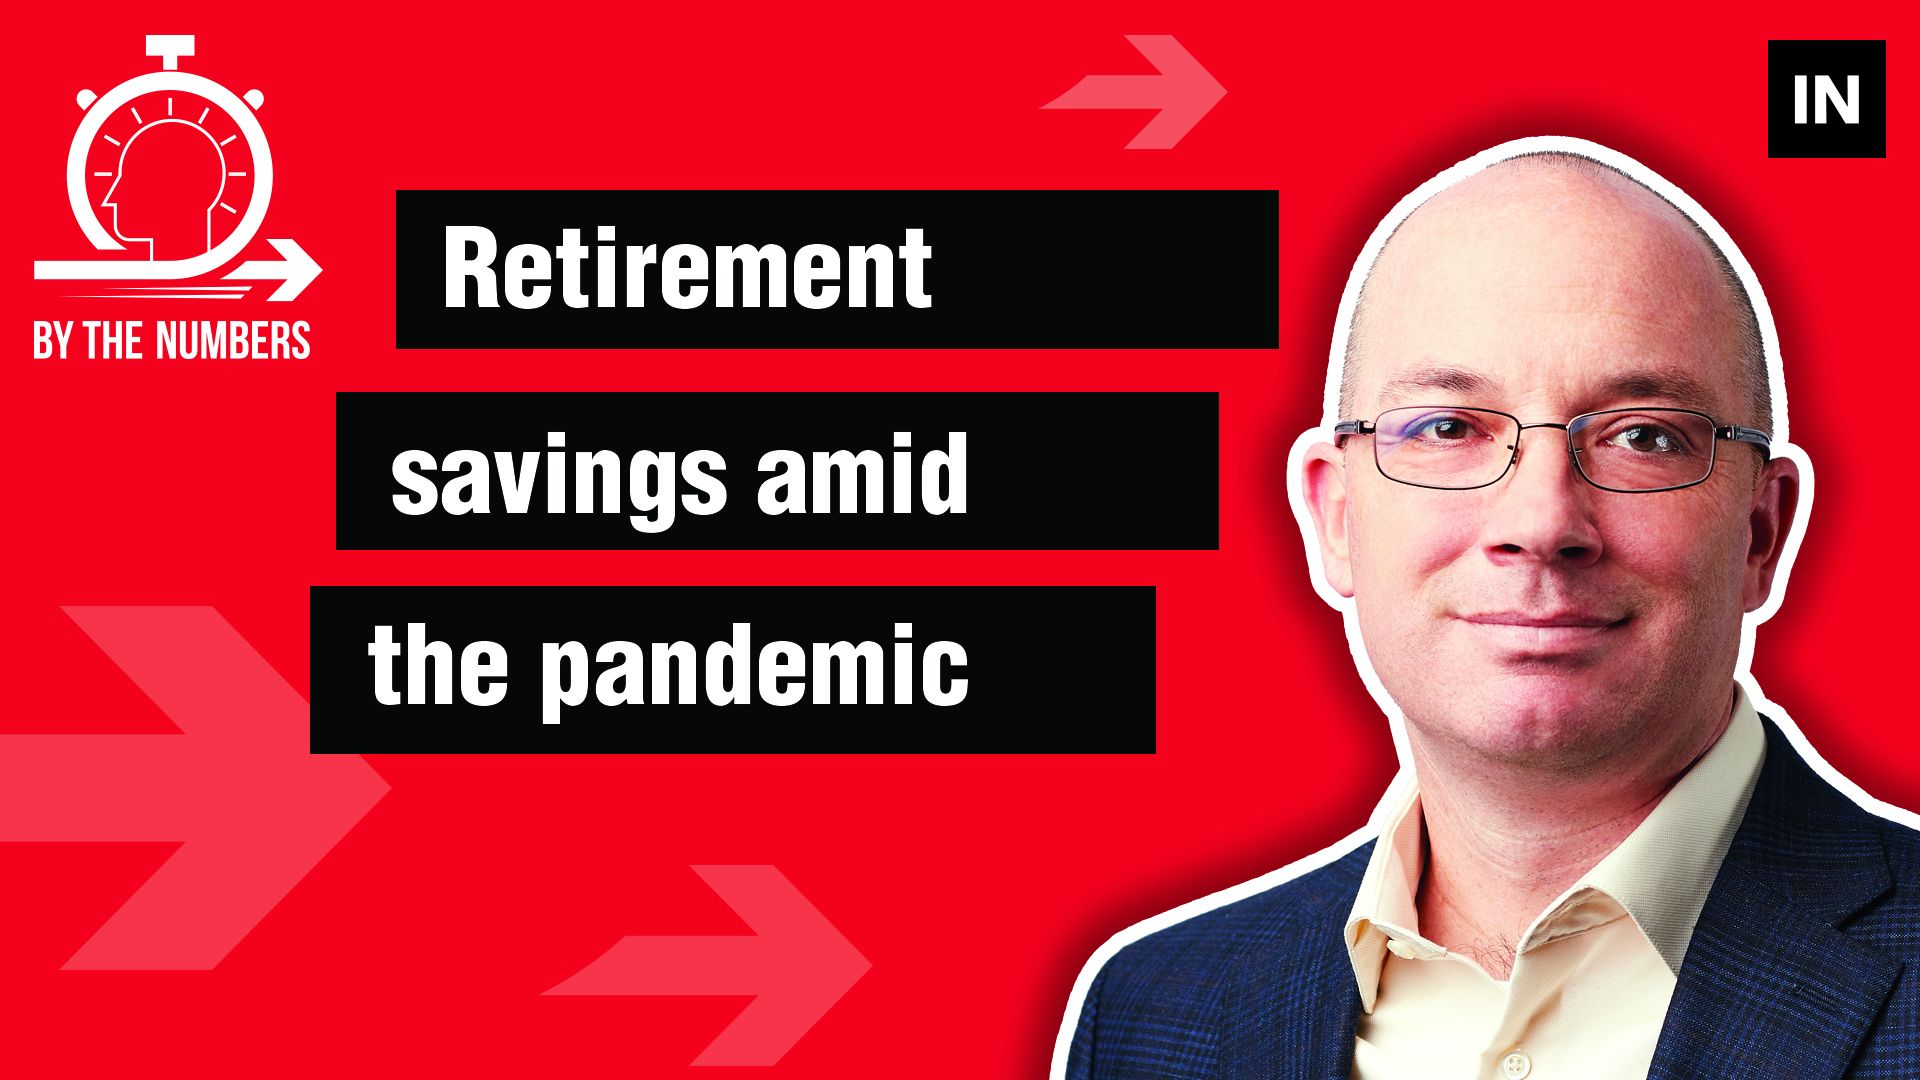 By the Numbers: Retirement savings amid the pandemic